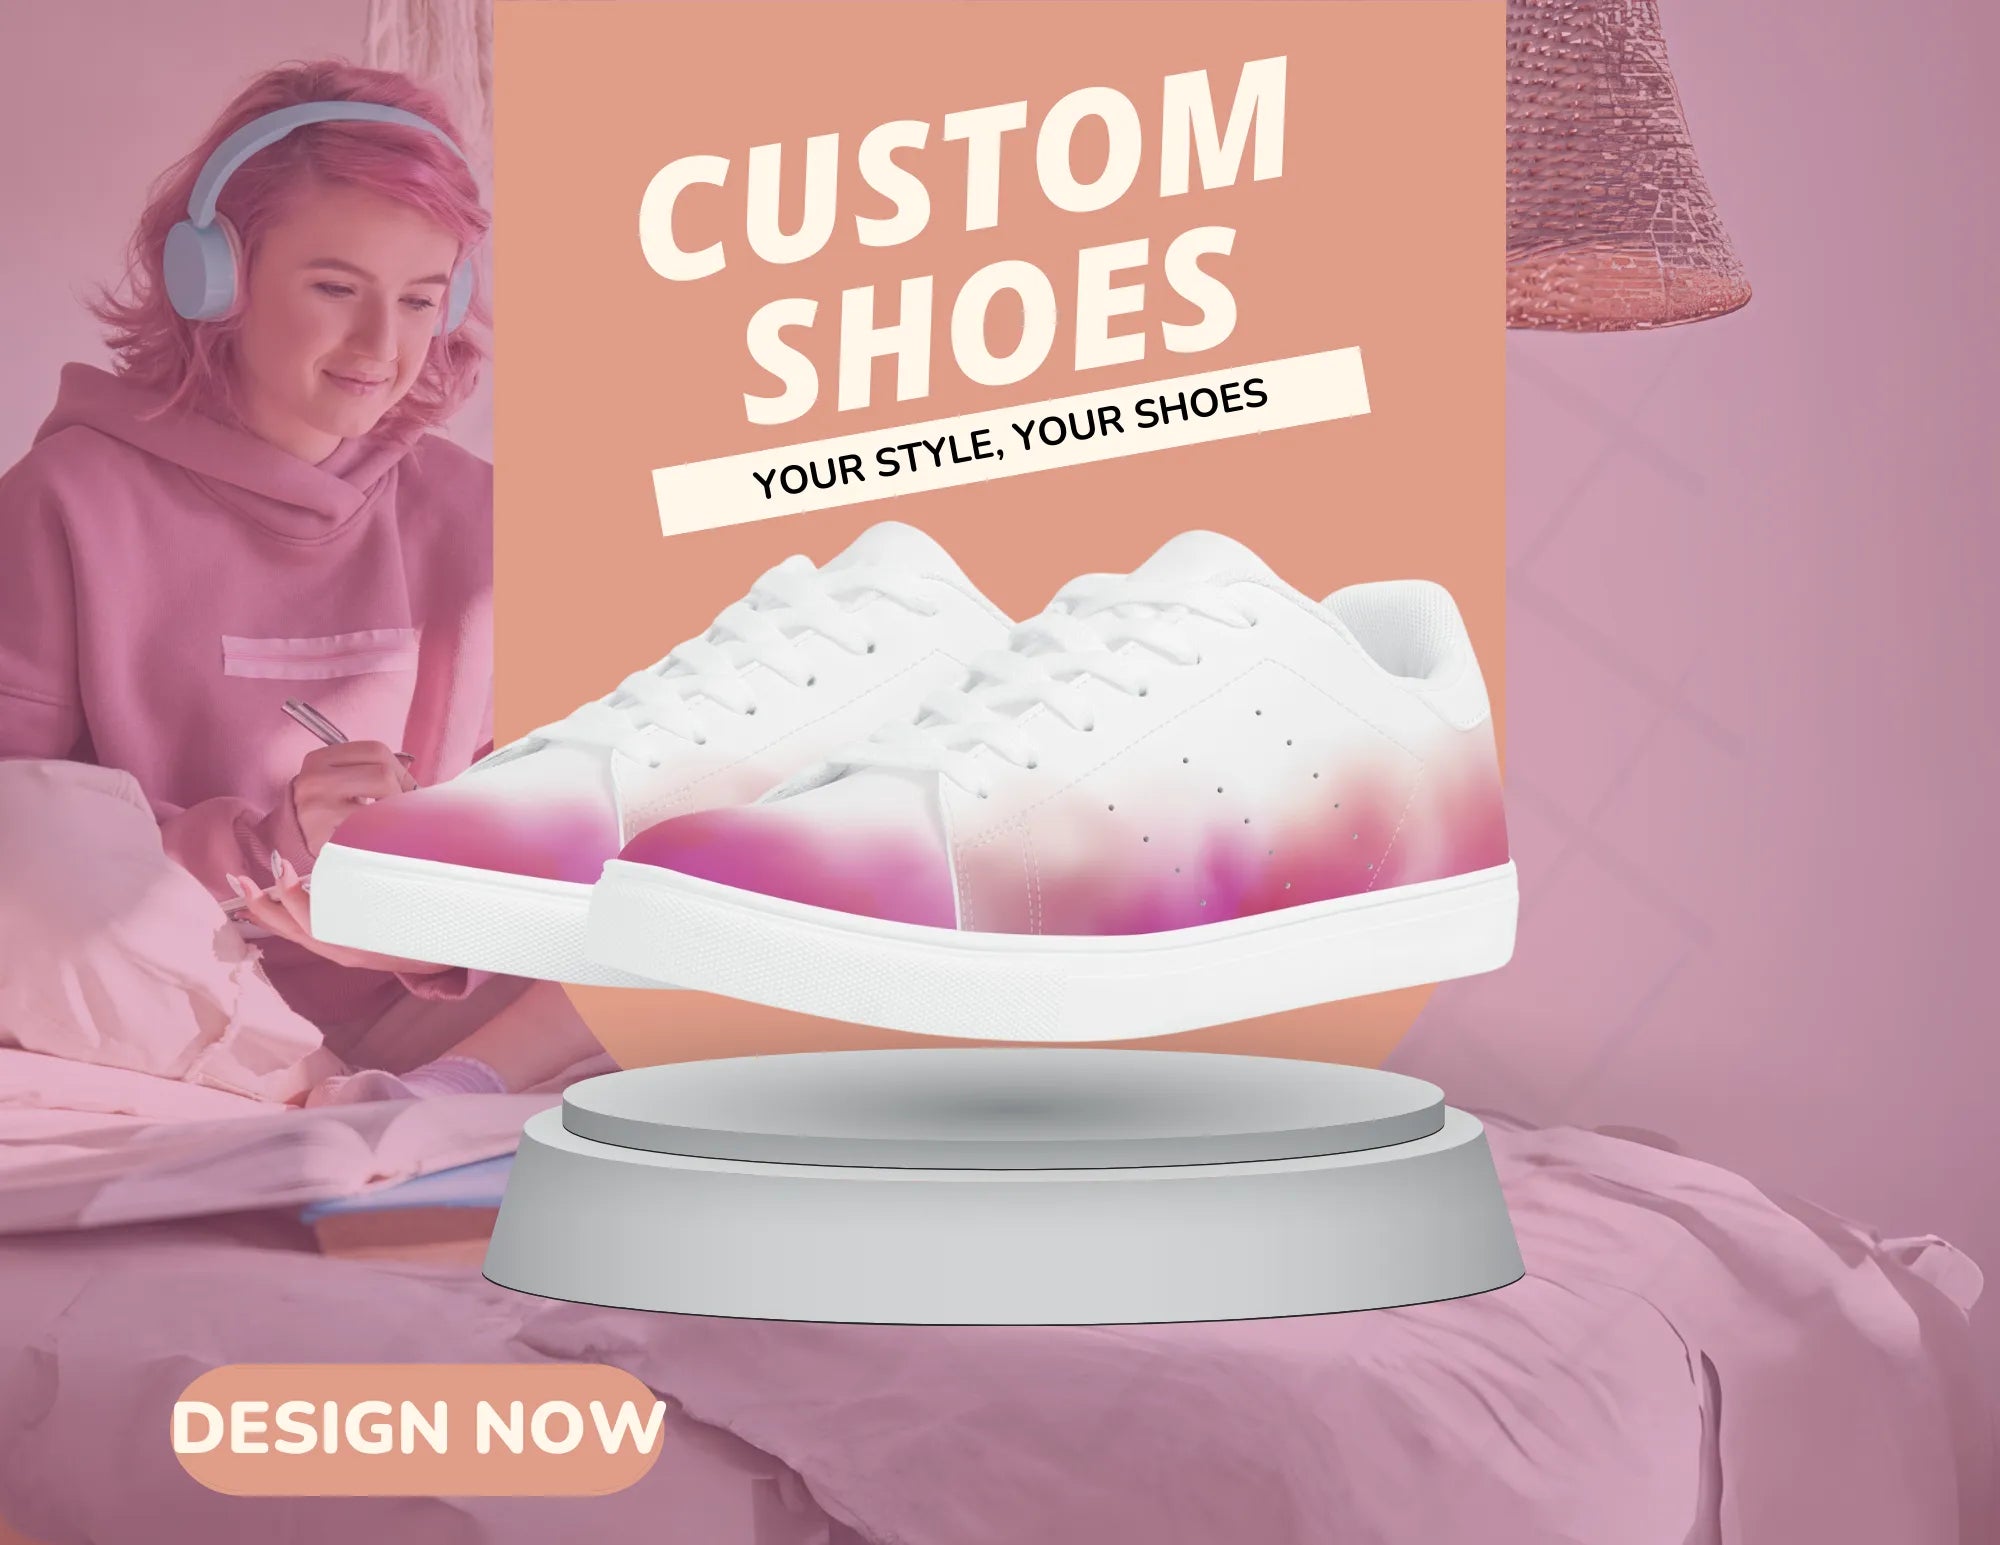 Business Casual for Women: Customize your Shoes to your Business